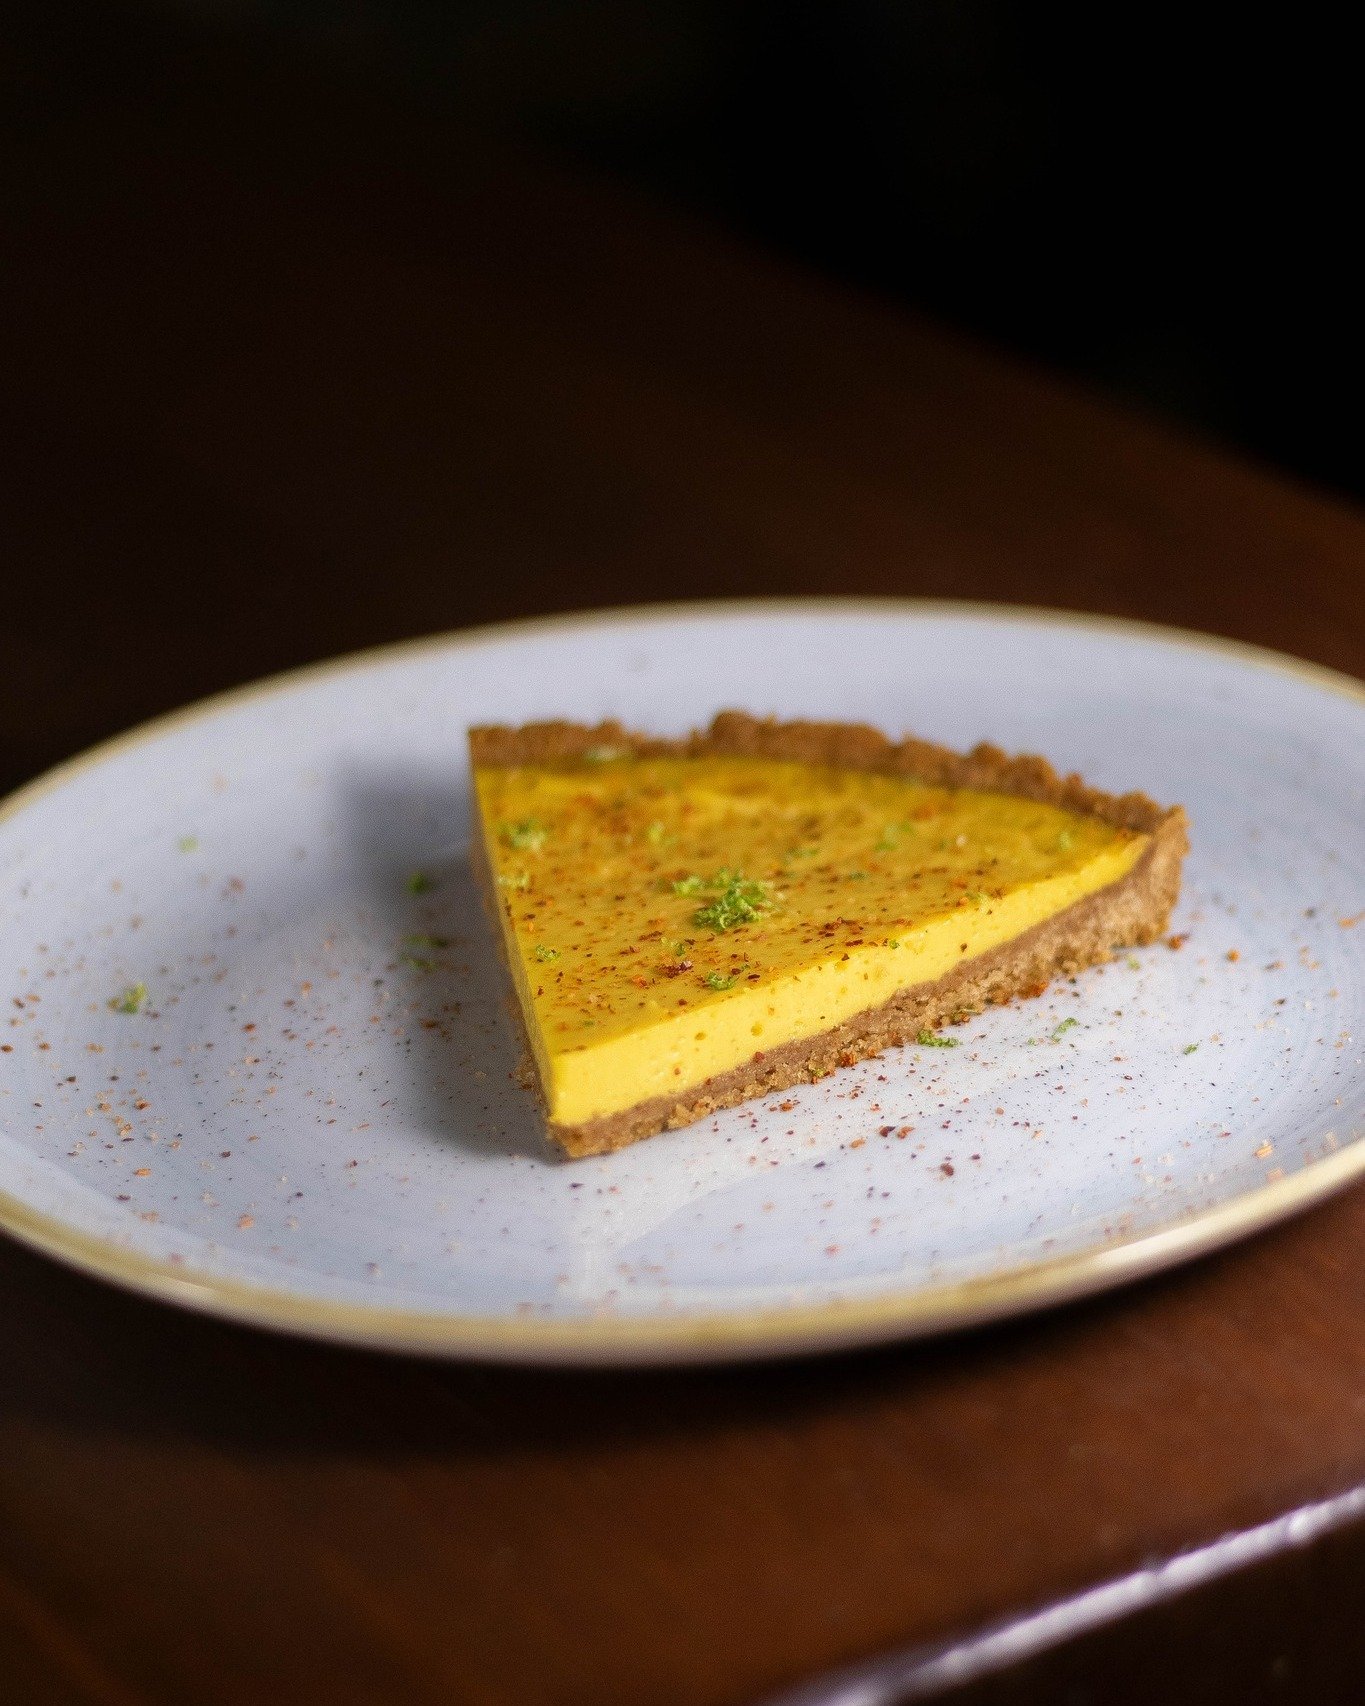 Finish things off on a high note with  our new mango-lime tart &amp; spiced chocolate souffl&eacute;. 🧁